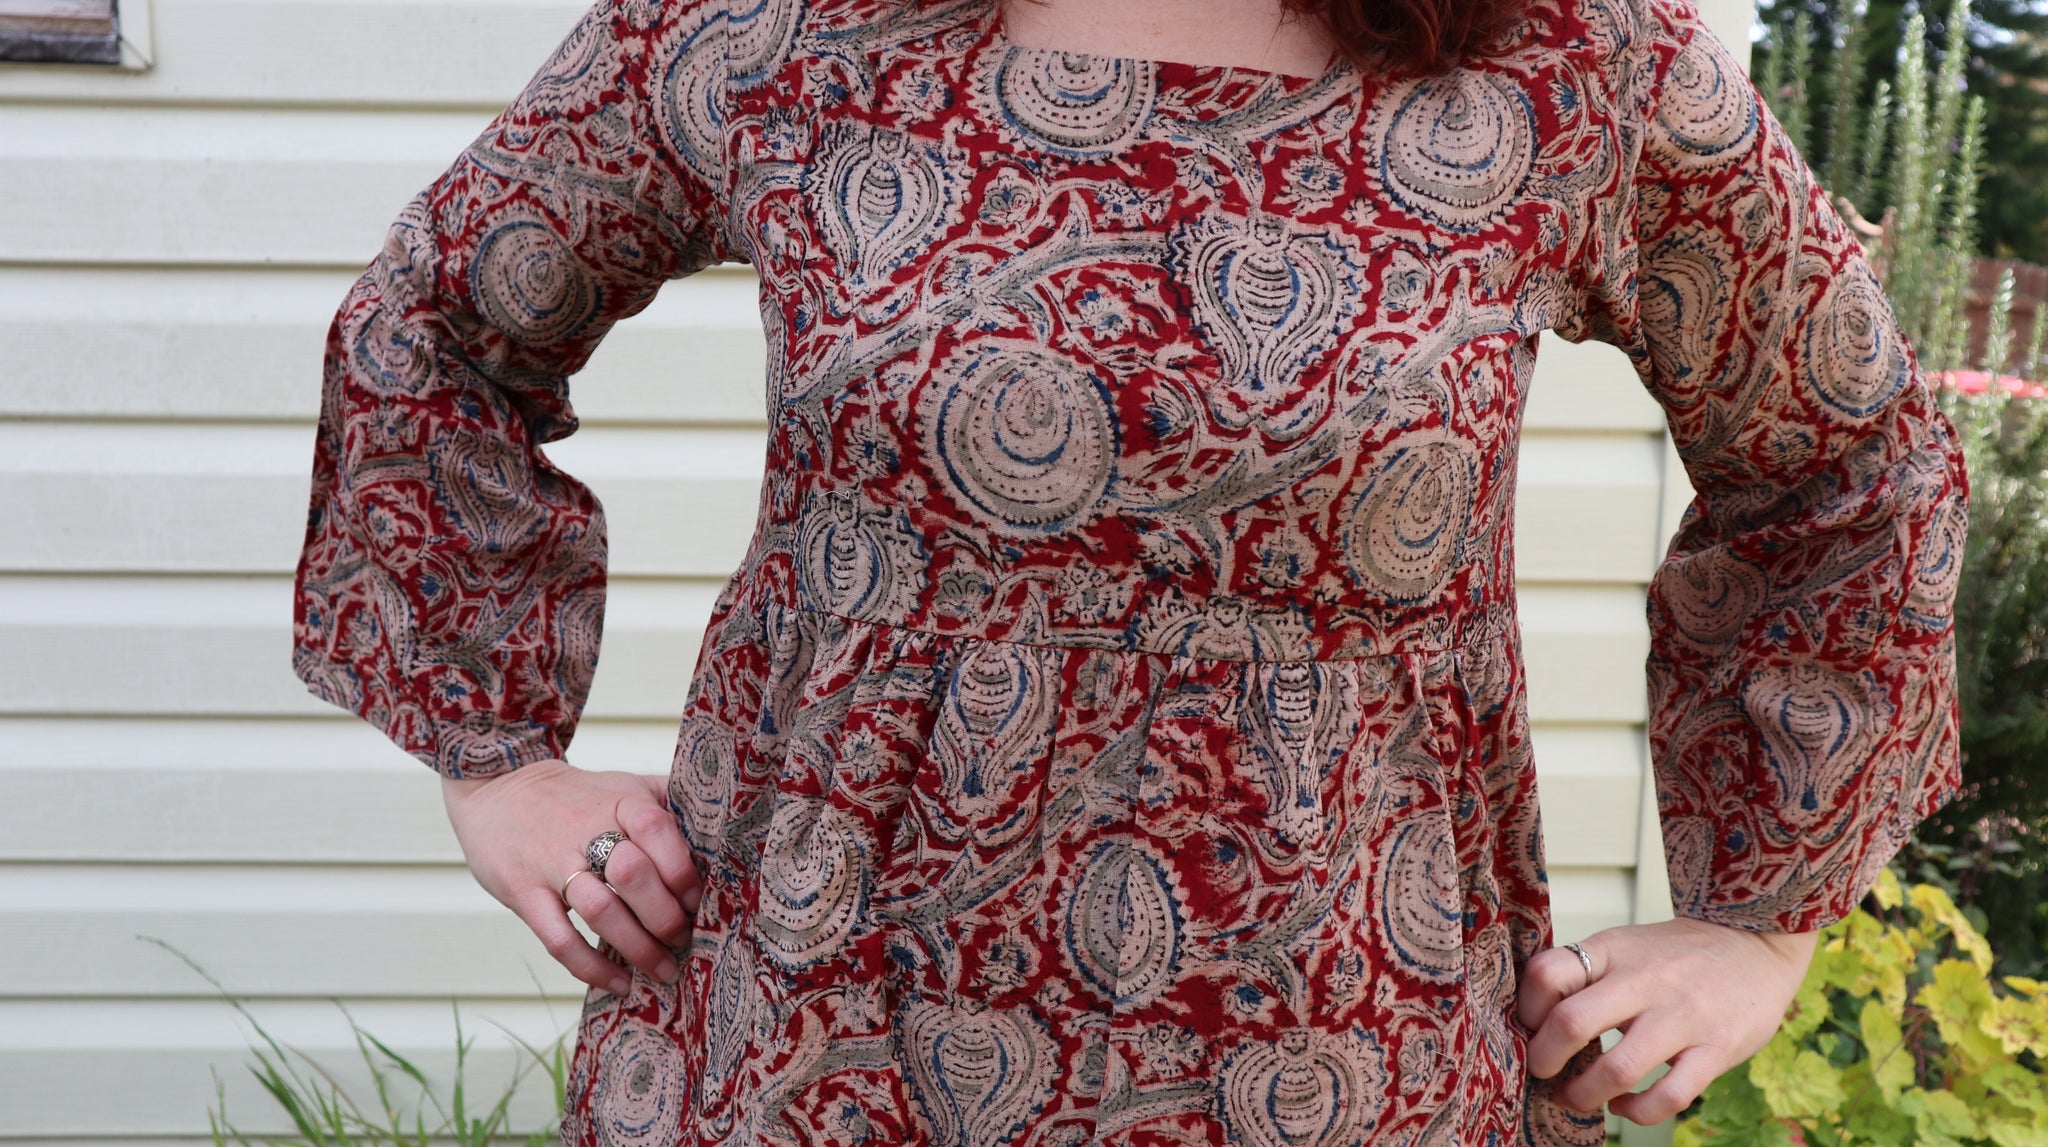 Fair trade ethical bell sleeve top with square neck, Red patterned design with traditional Indian Tanjore Art - branches with abstract fruit and leaves are displayed